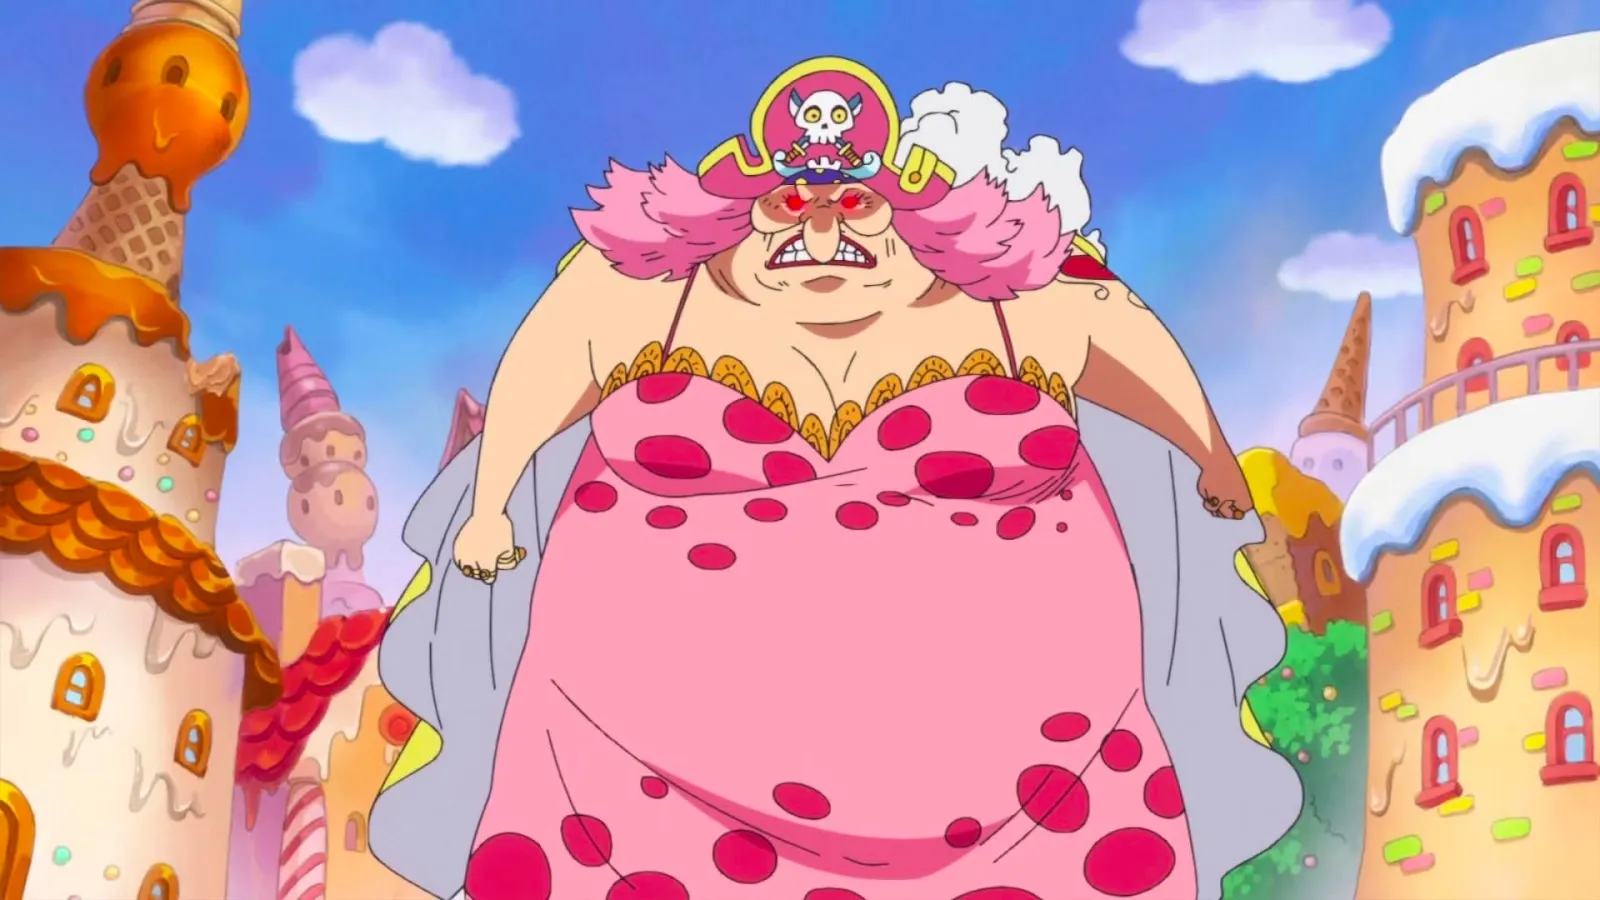 7 Ugly One Piece Characters - Awful:(: